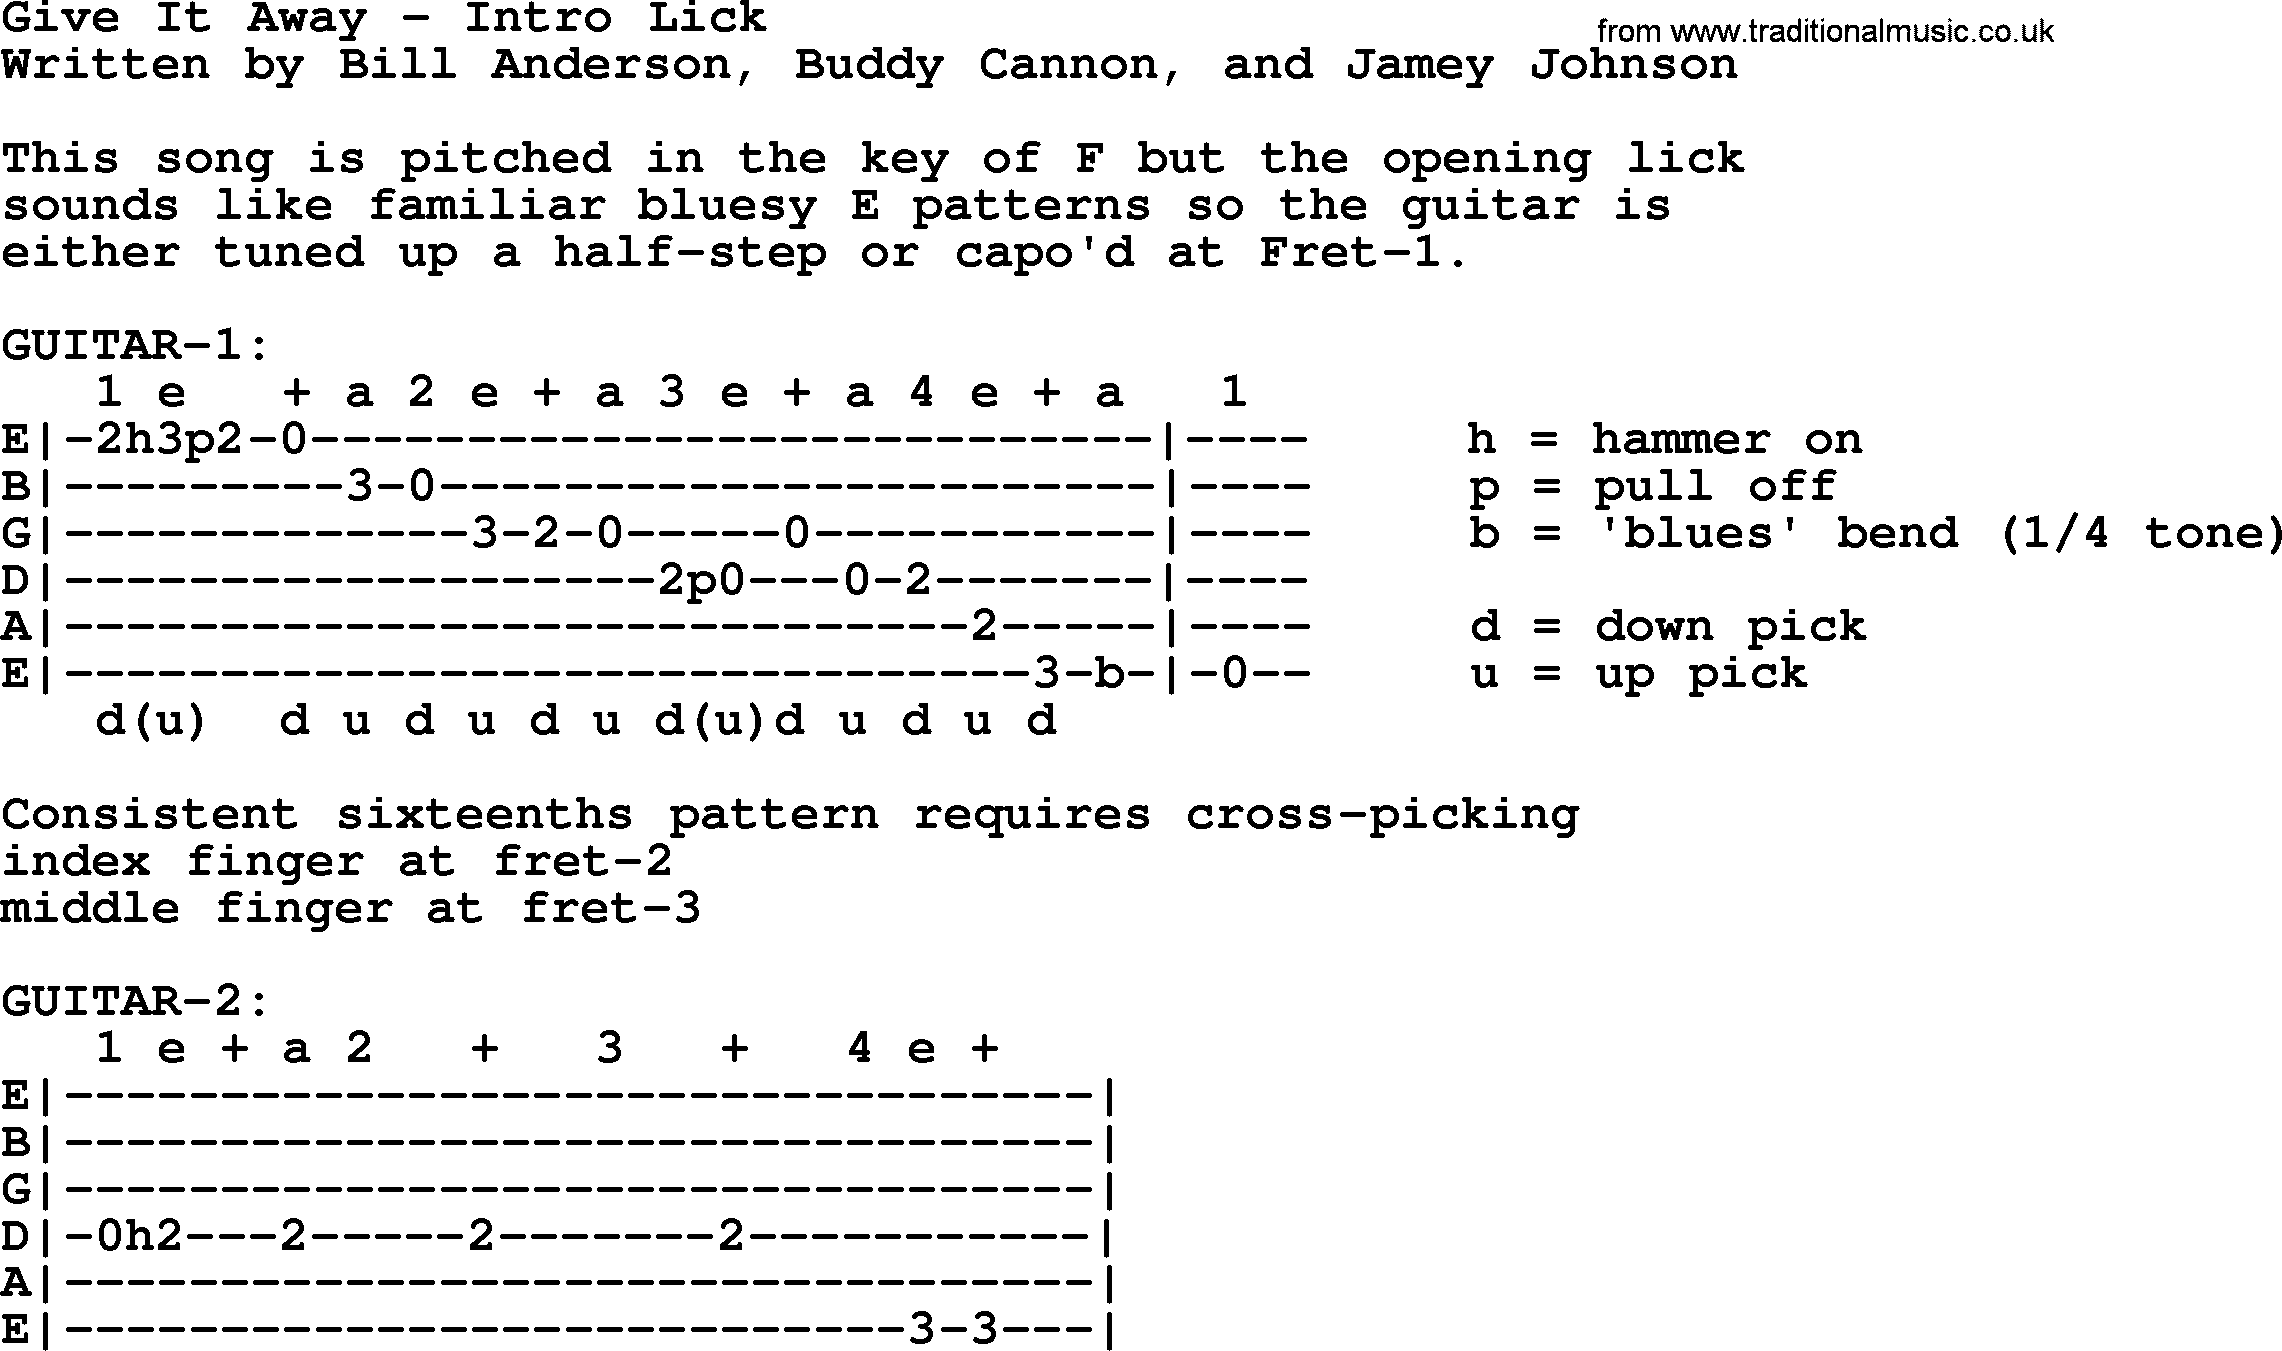 George Strait song: Give It Away - Intro Lick, lyrics and chords